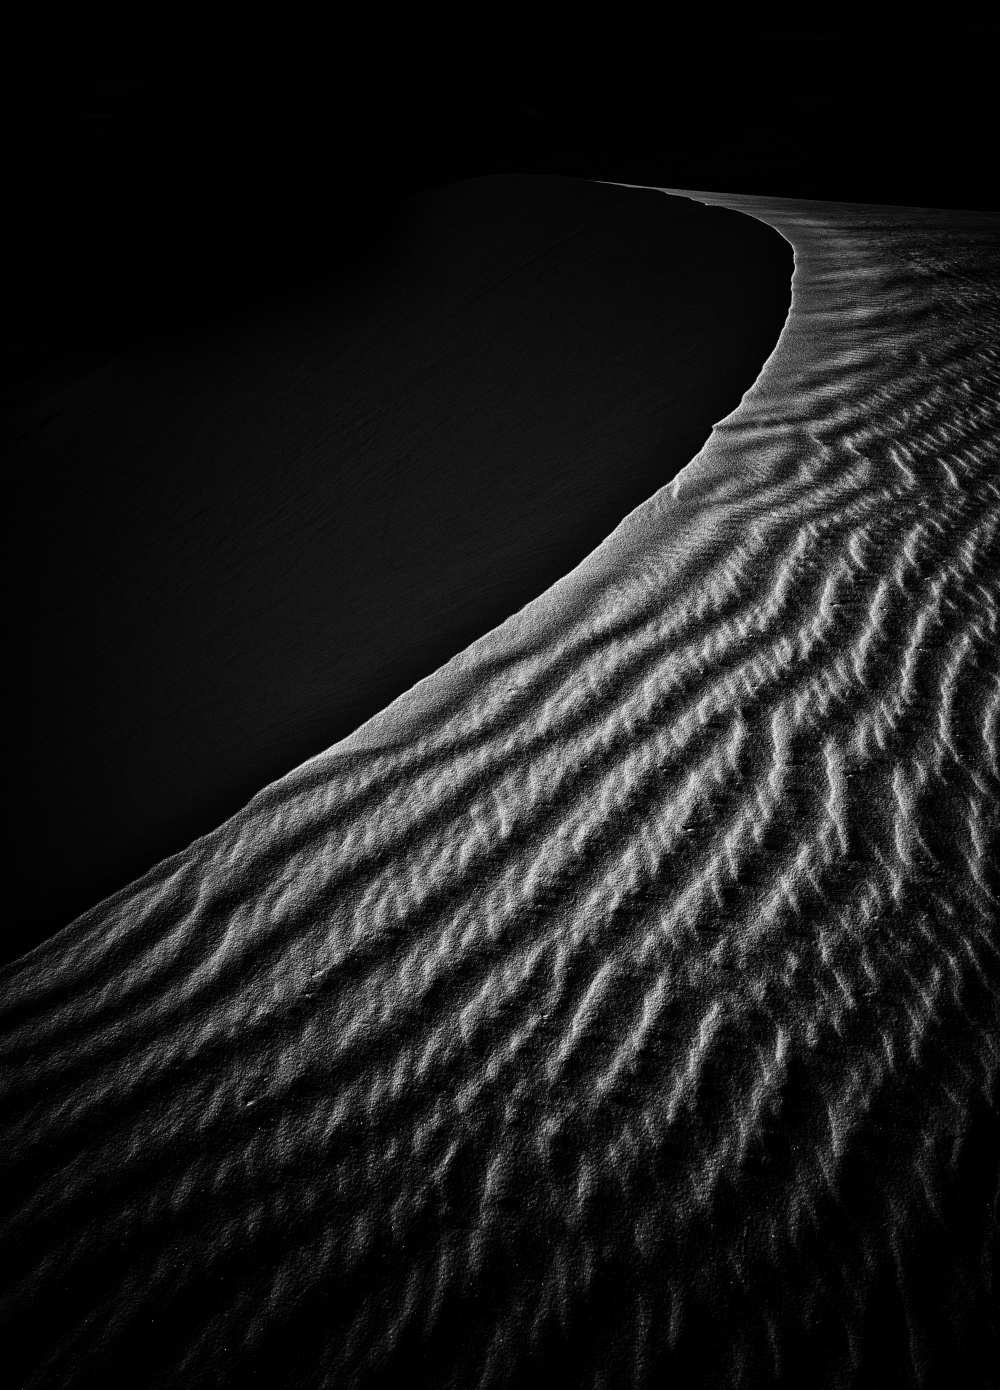 Sand Dune from Lydia Jacobs